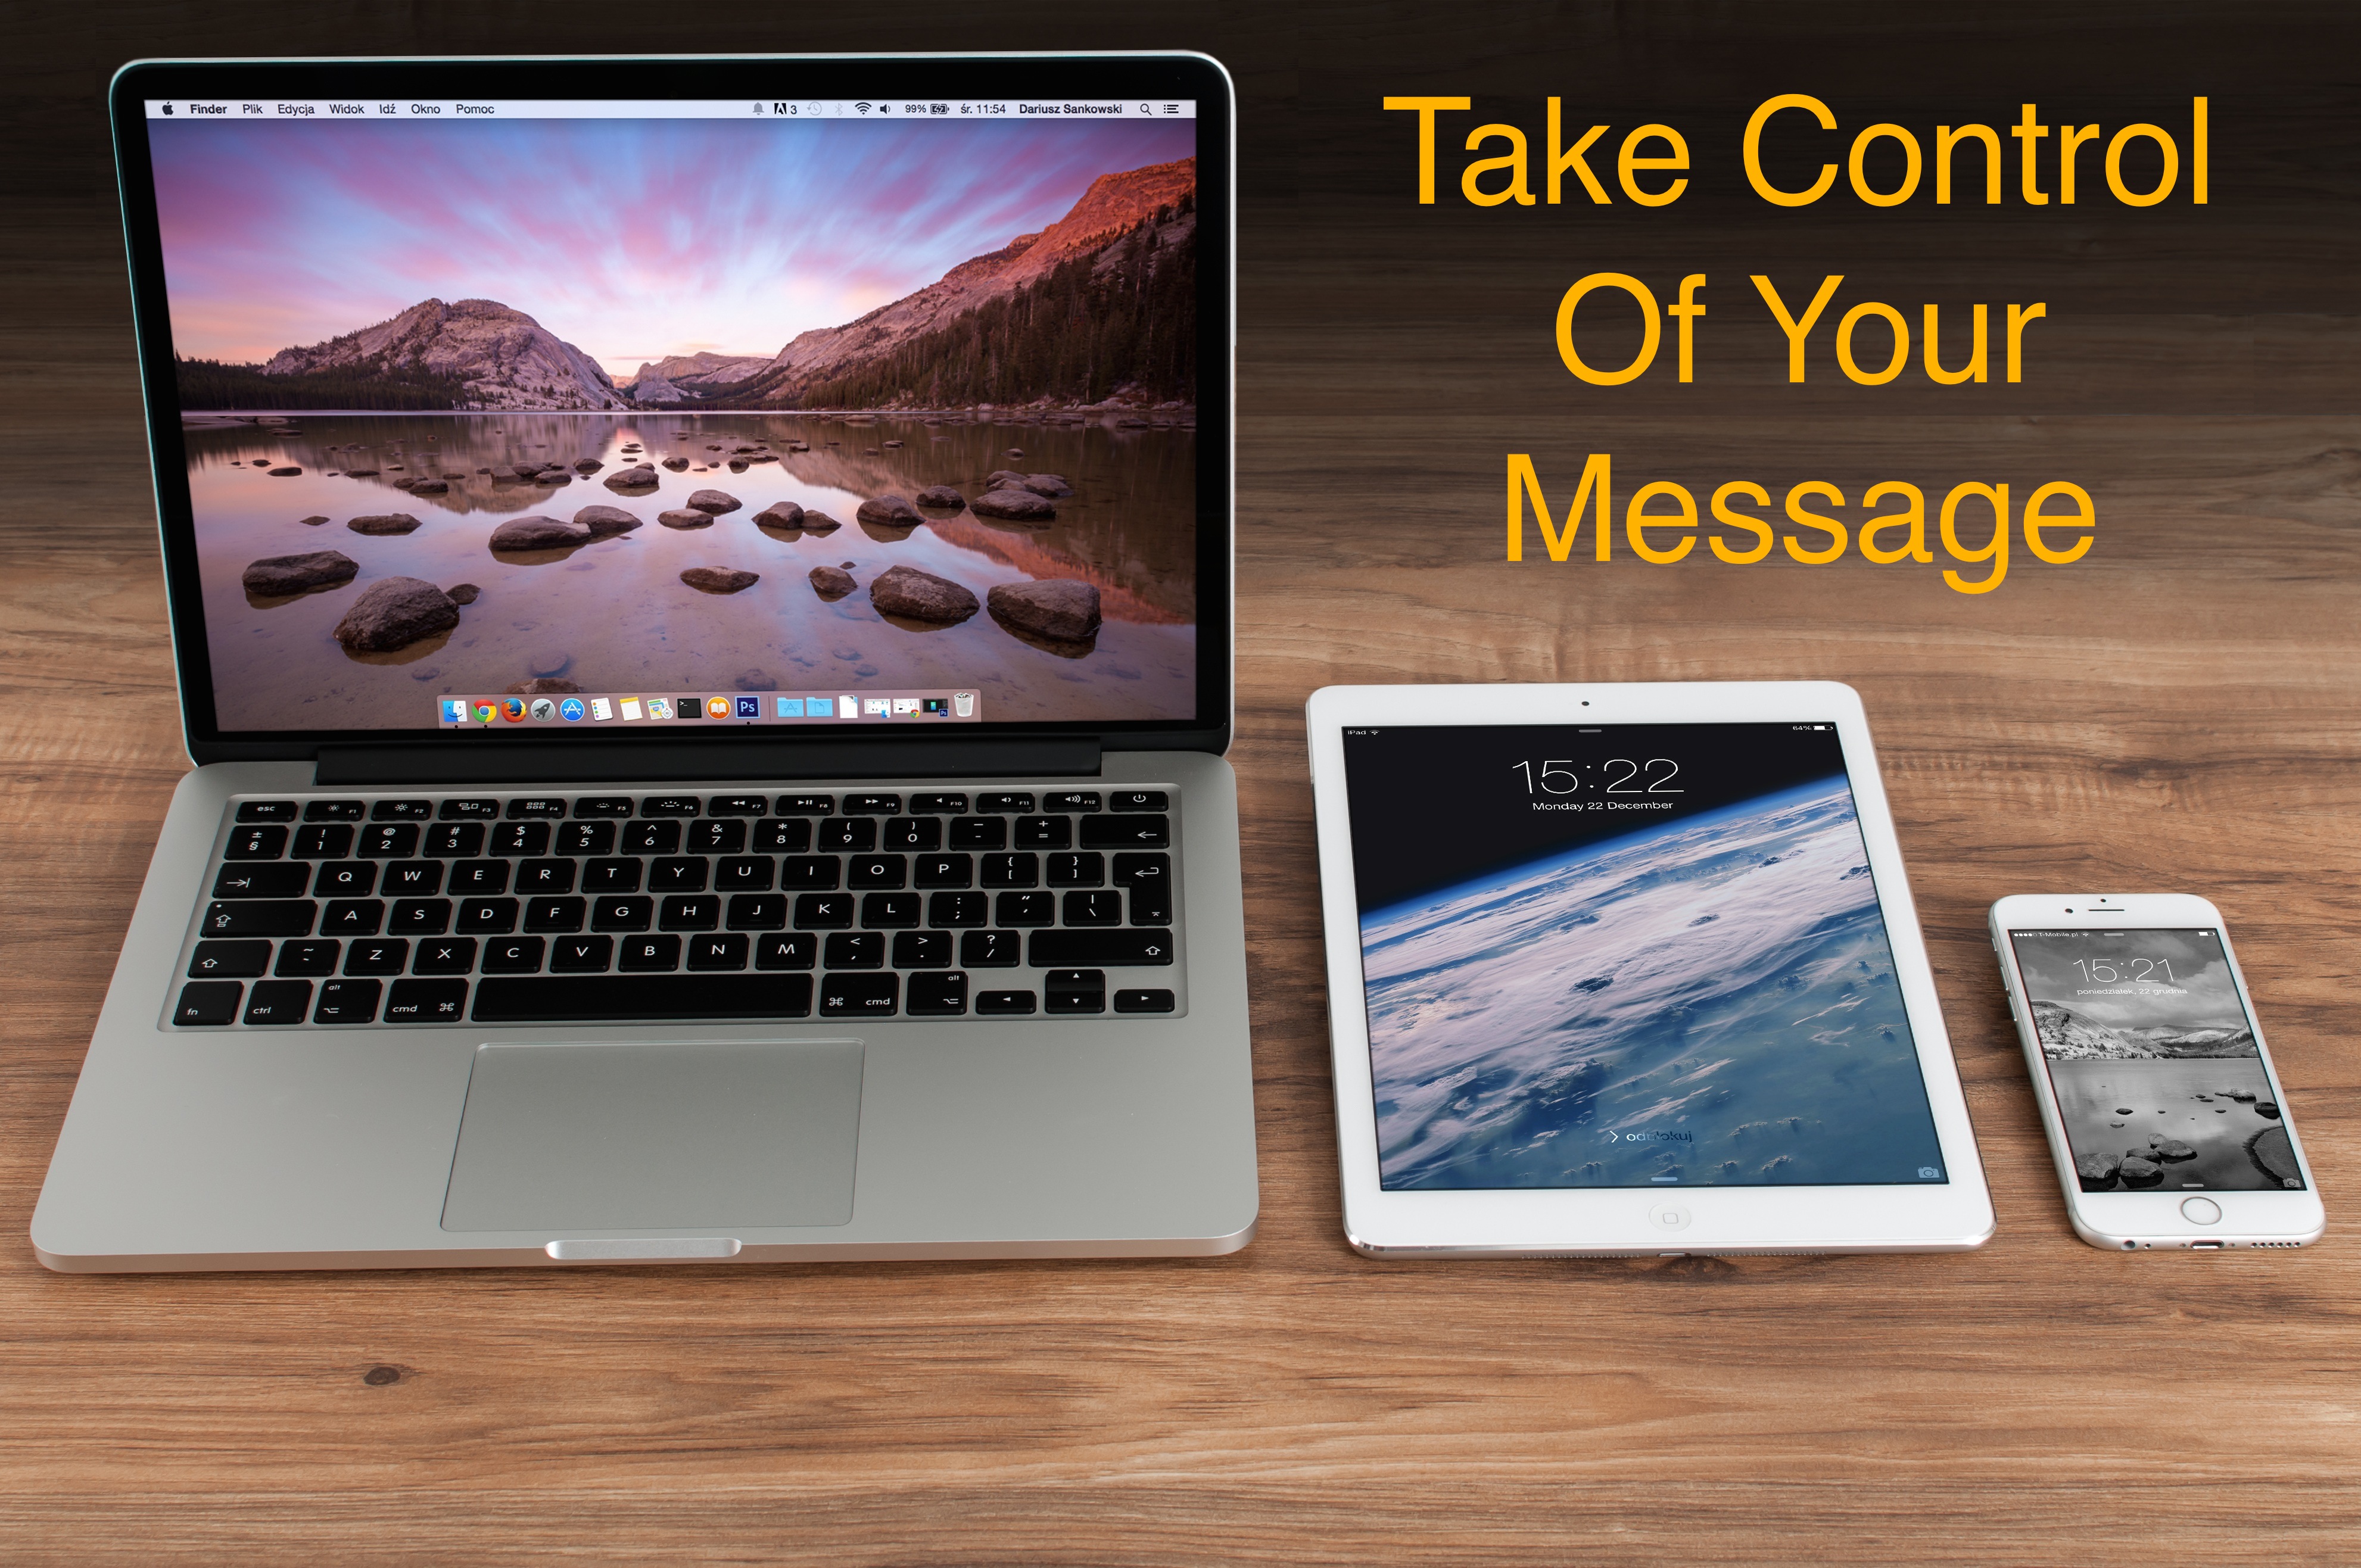 Take control of your message